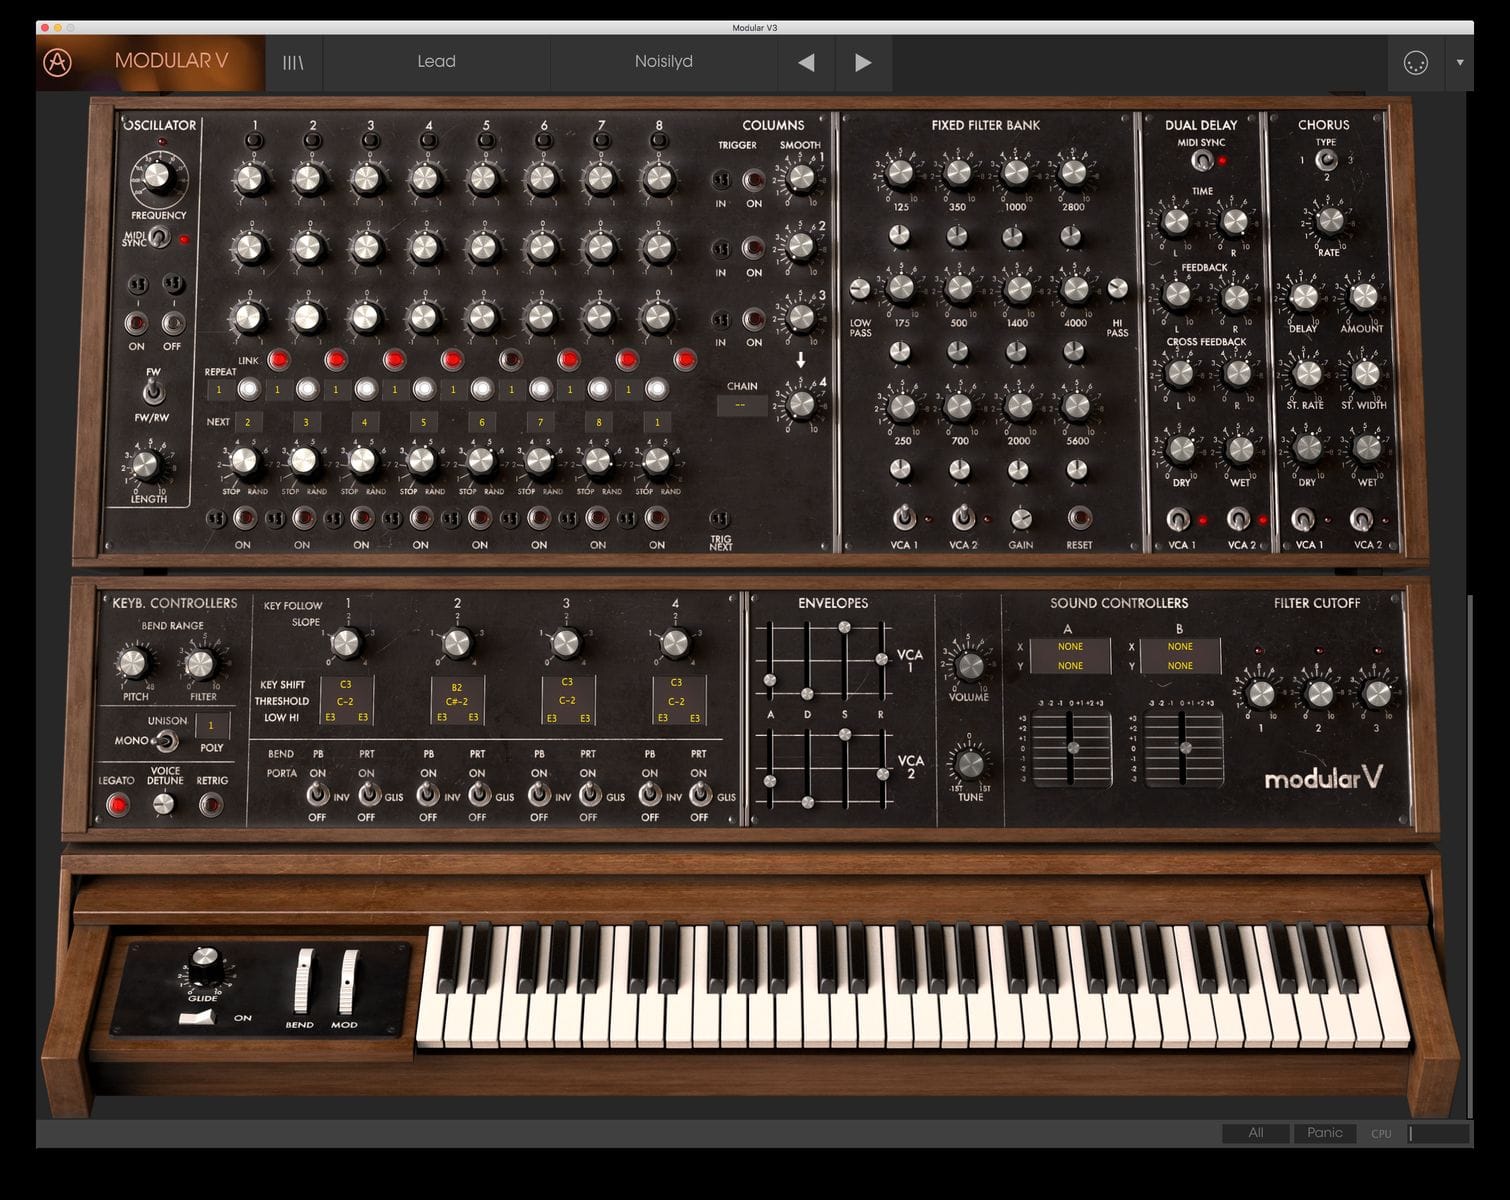 download the new version for android Arturia ARP 2600 V